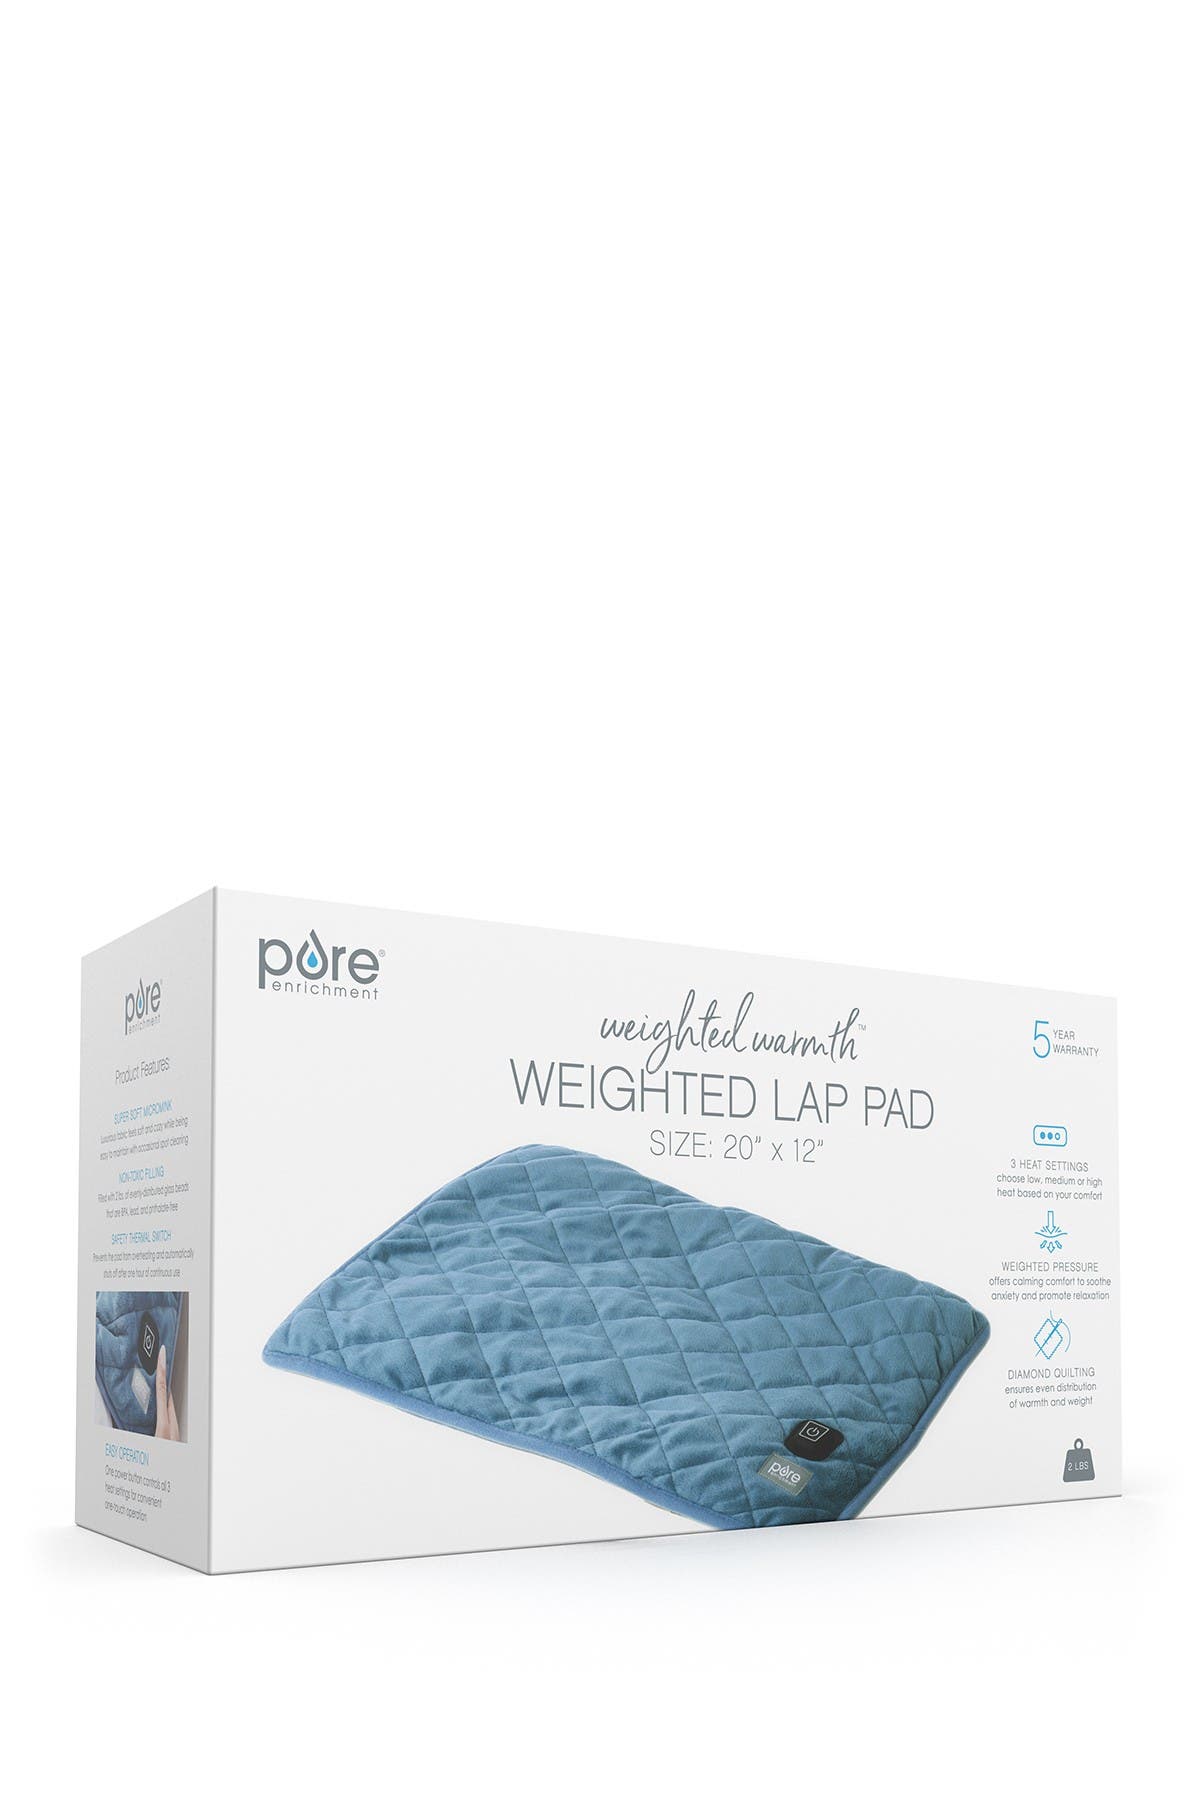 Pure Enrichment Weighted Warmth Lap Pad In Navy